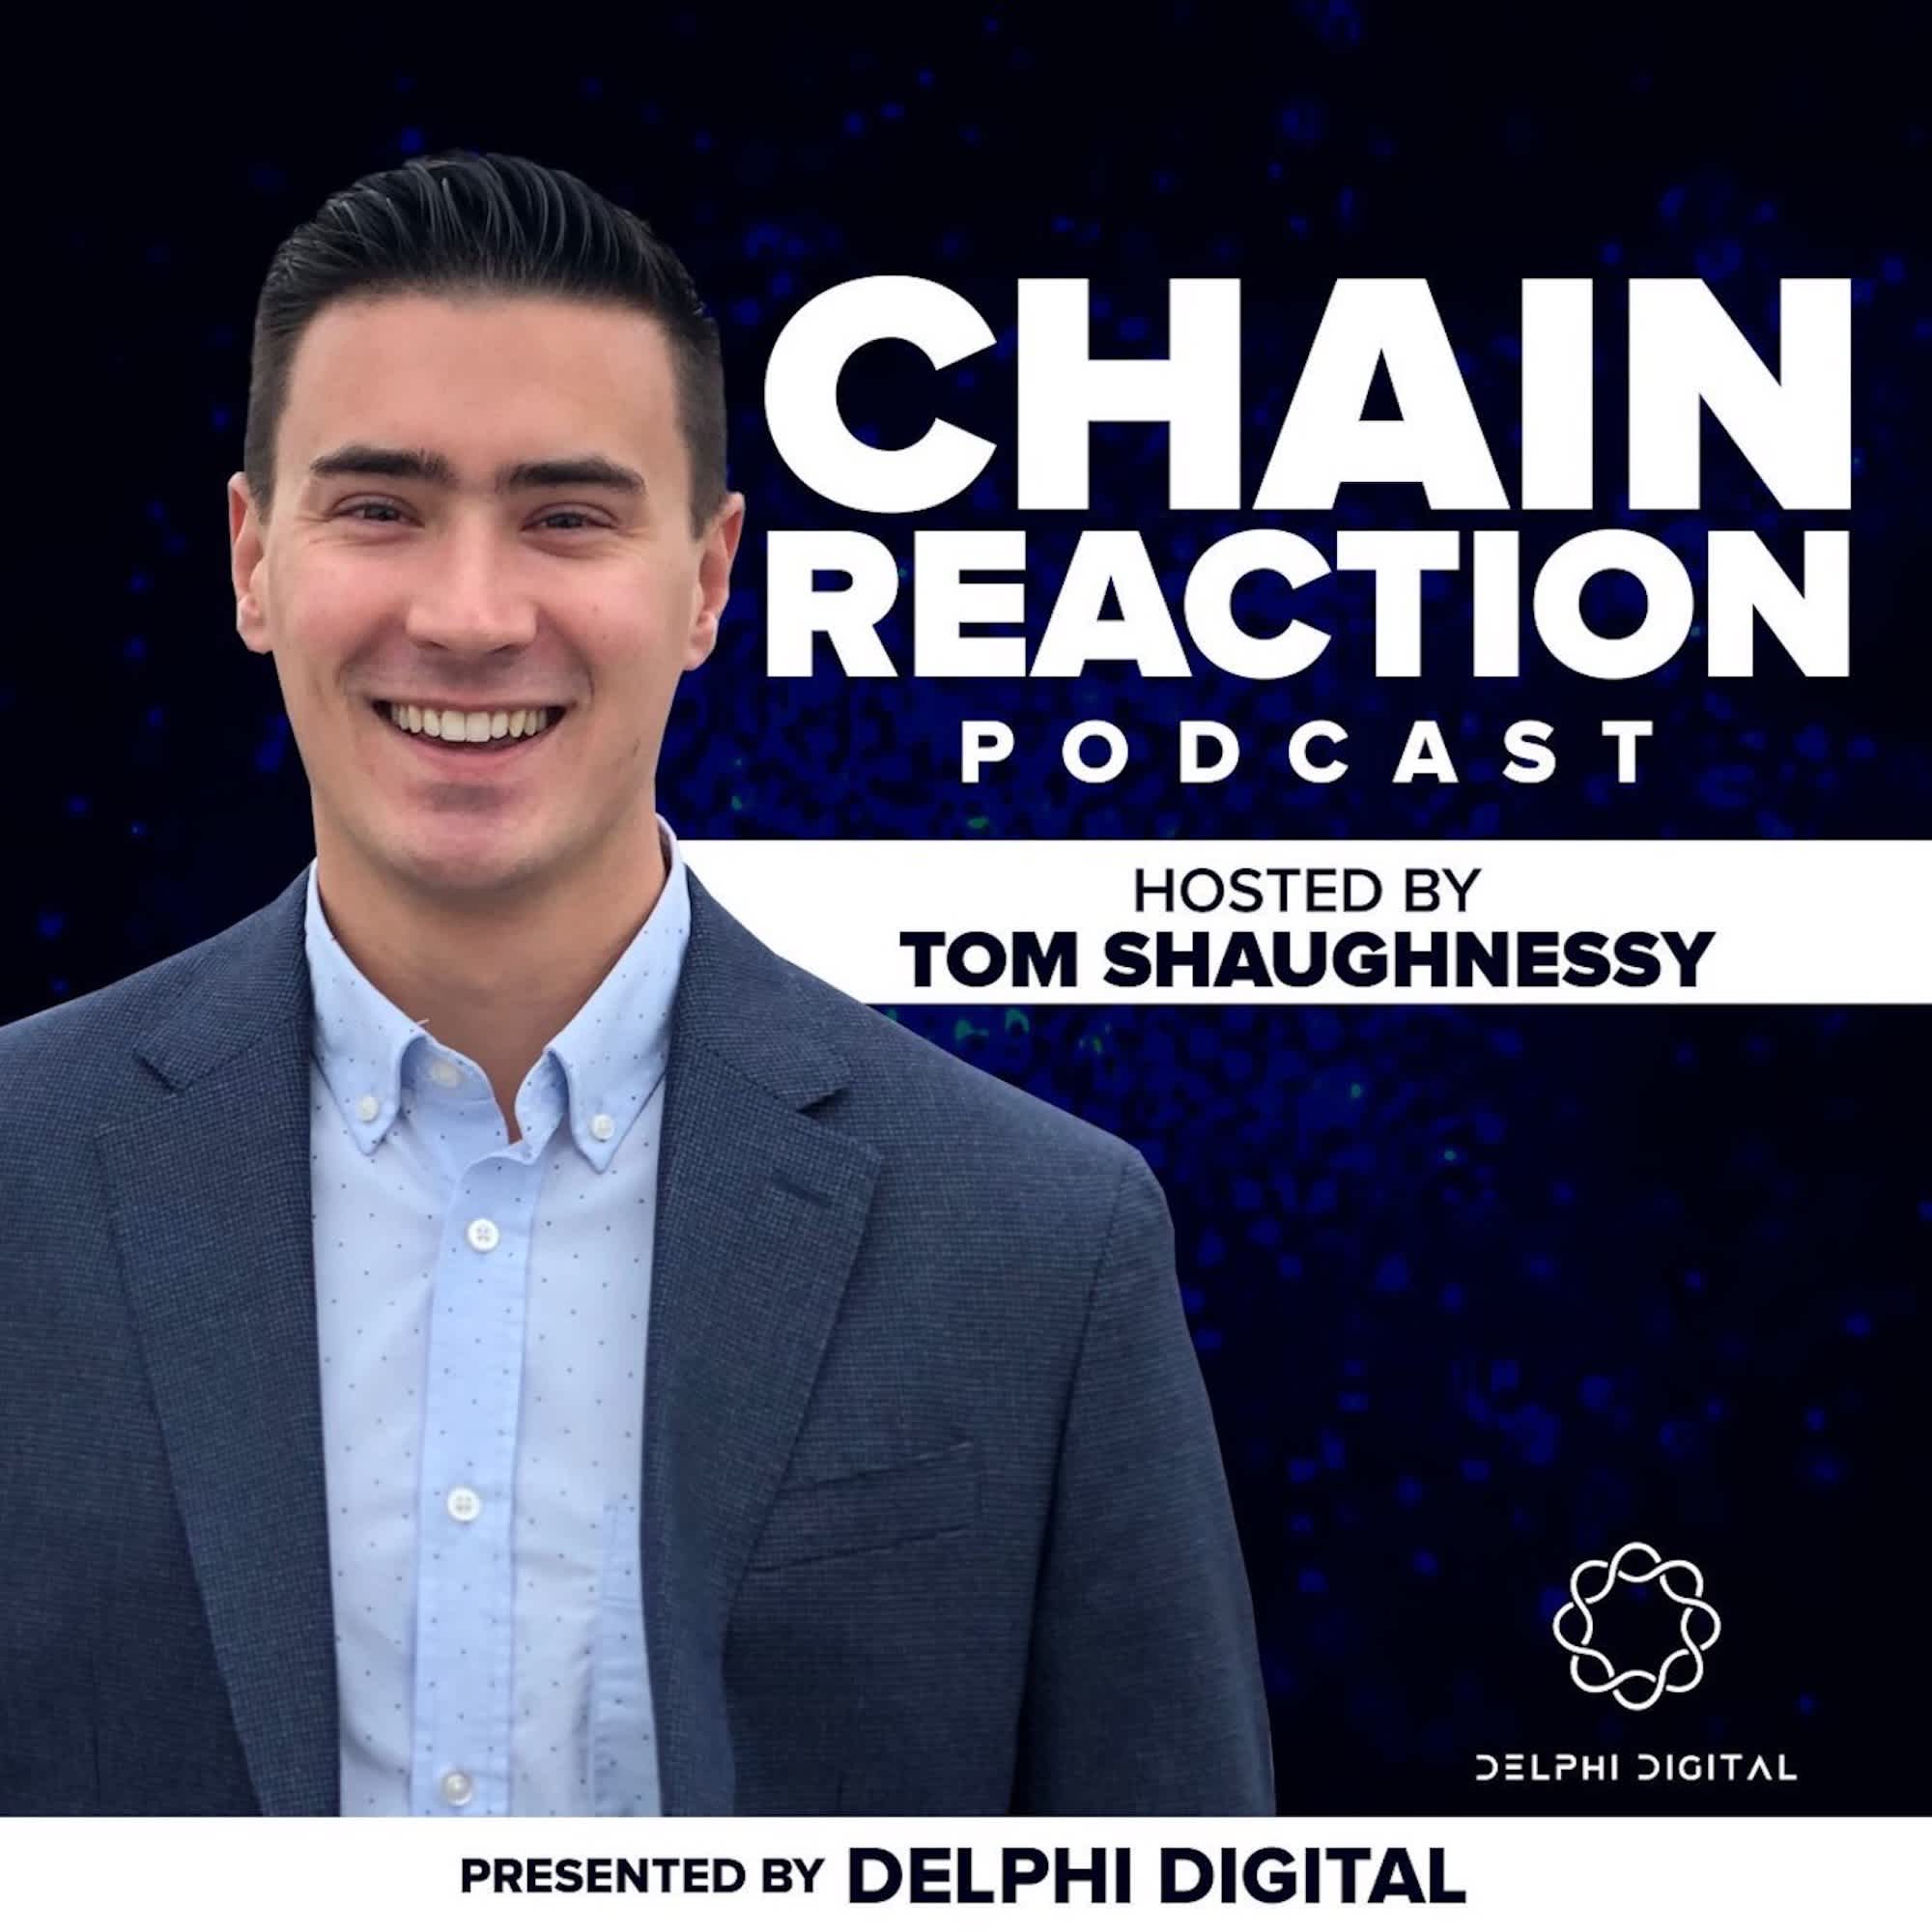 Chain Reaction Podcast